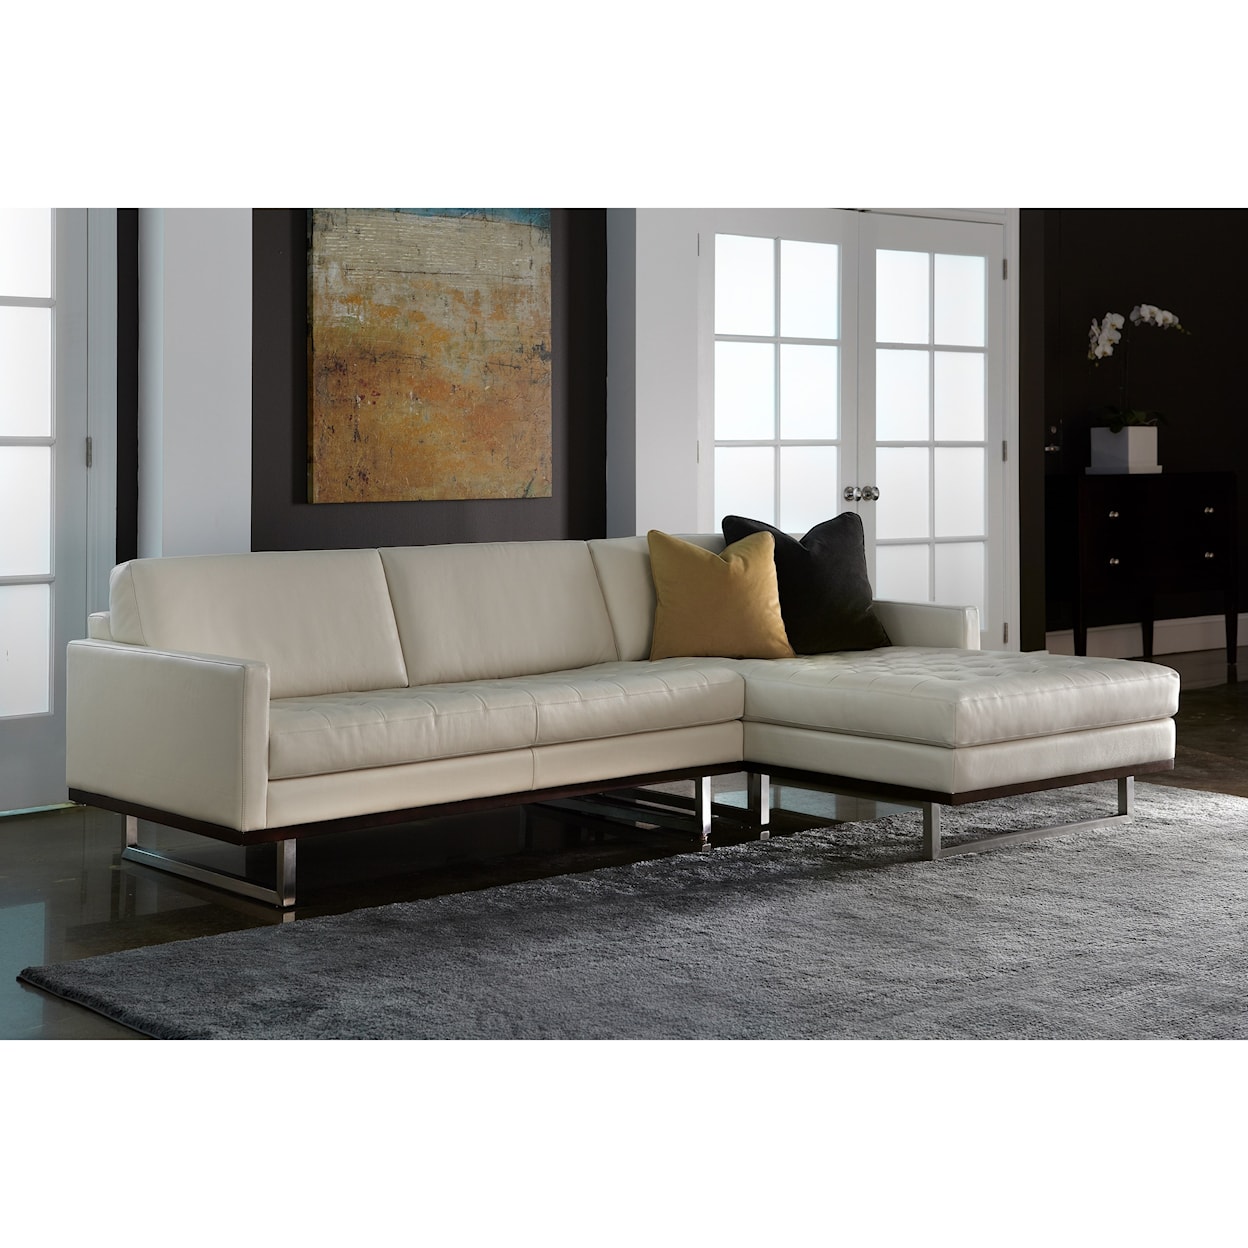 American Leather Tristan 2-Piece Chaise Sectional